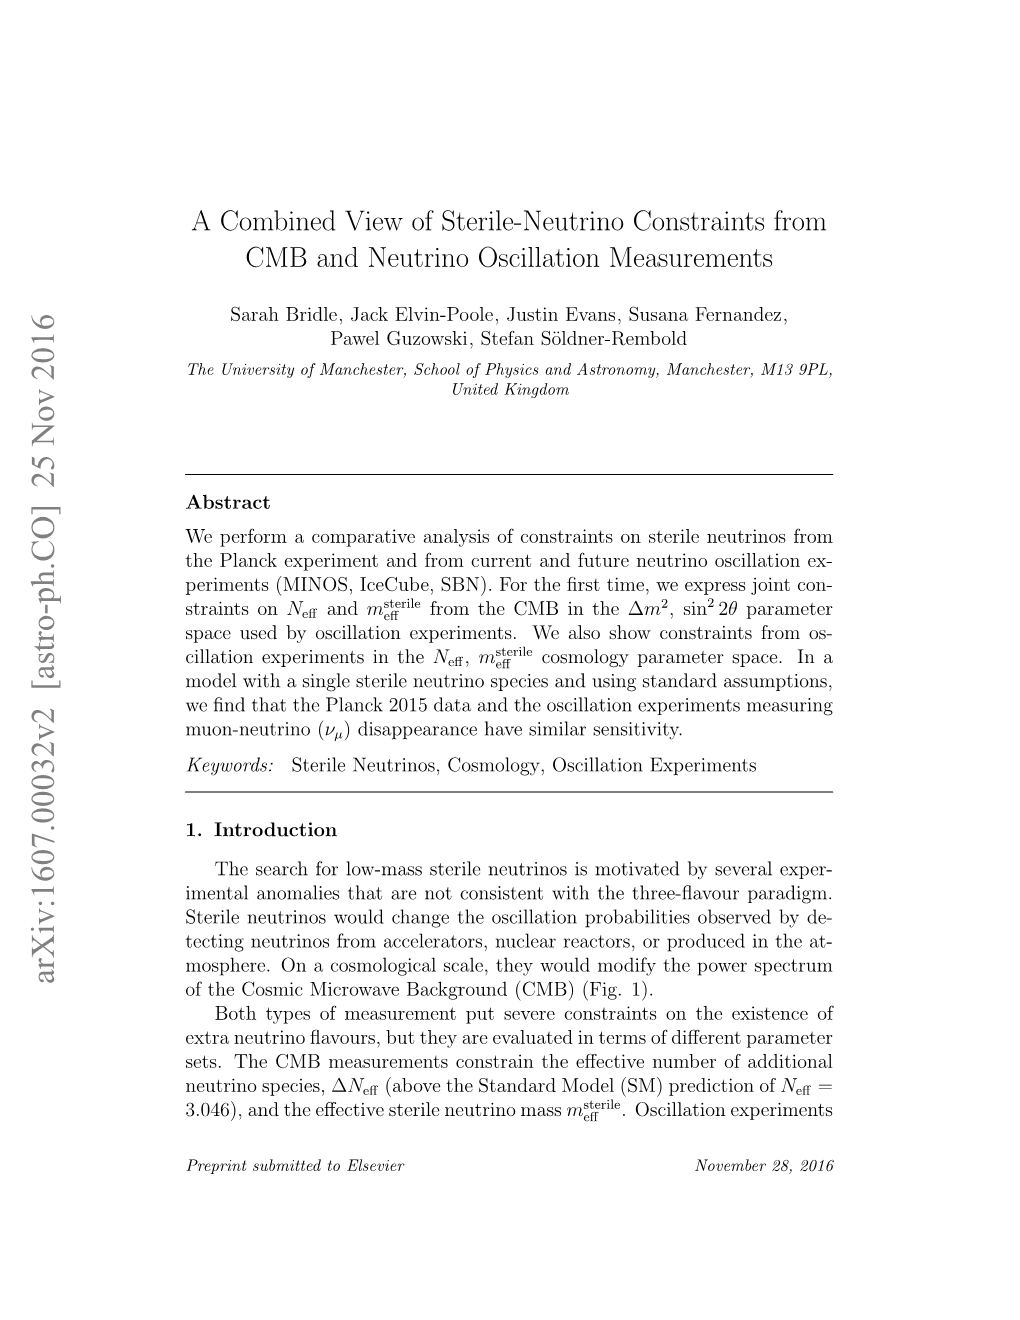 A Combined View of Sterile-Neutrino Constraints from CMB and Neutrino Oscillation Measurements